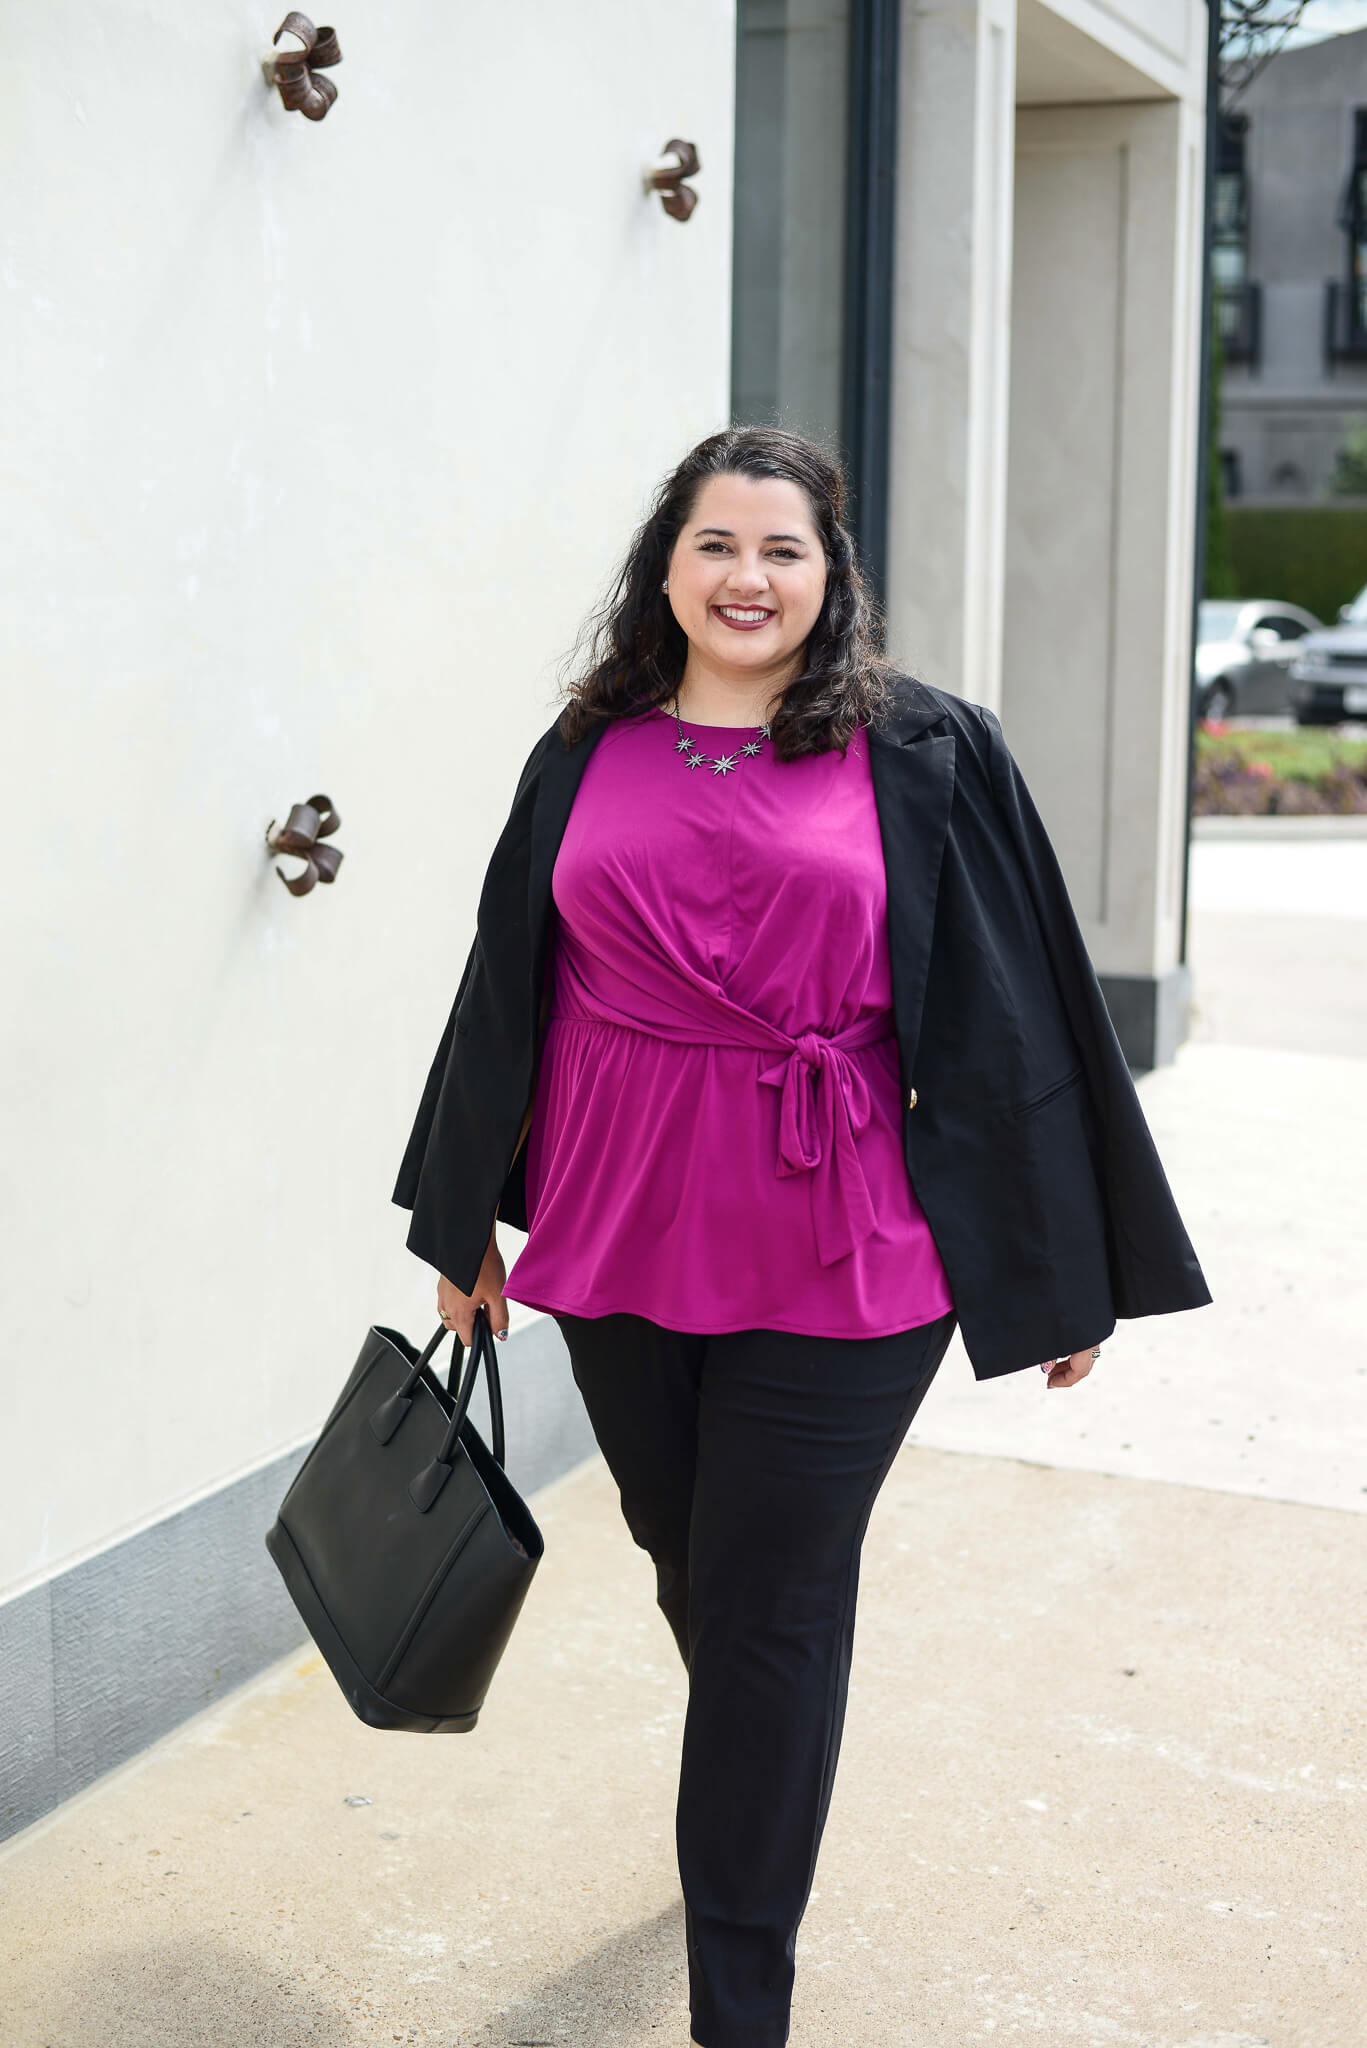 Heading into the office with a spring in my step because I'm feeling wonderful in my Lane Bryant plus size workwear from their latest collection. 